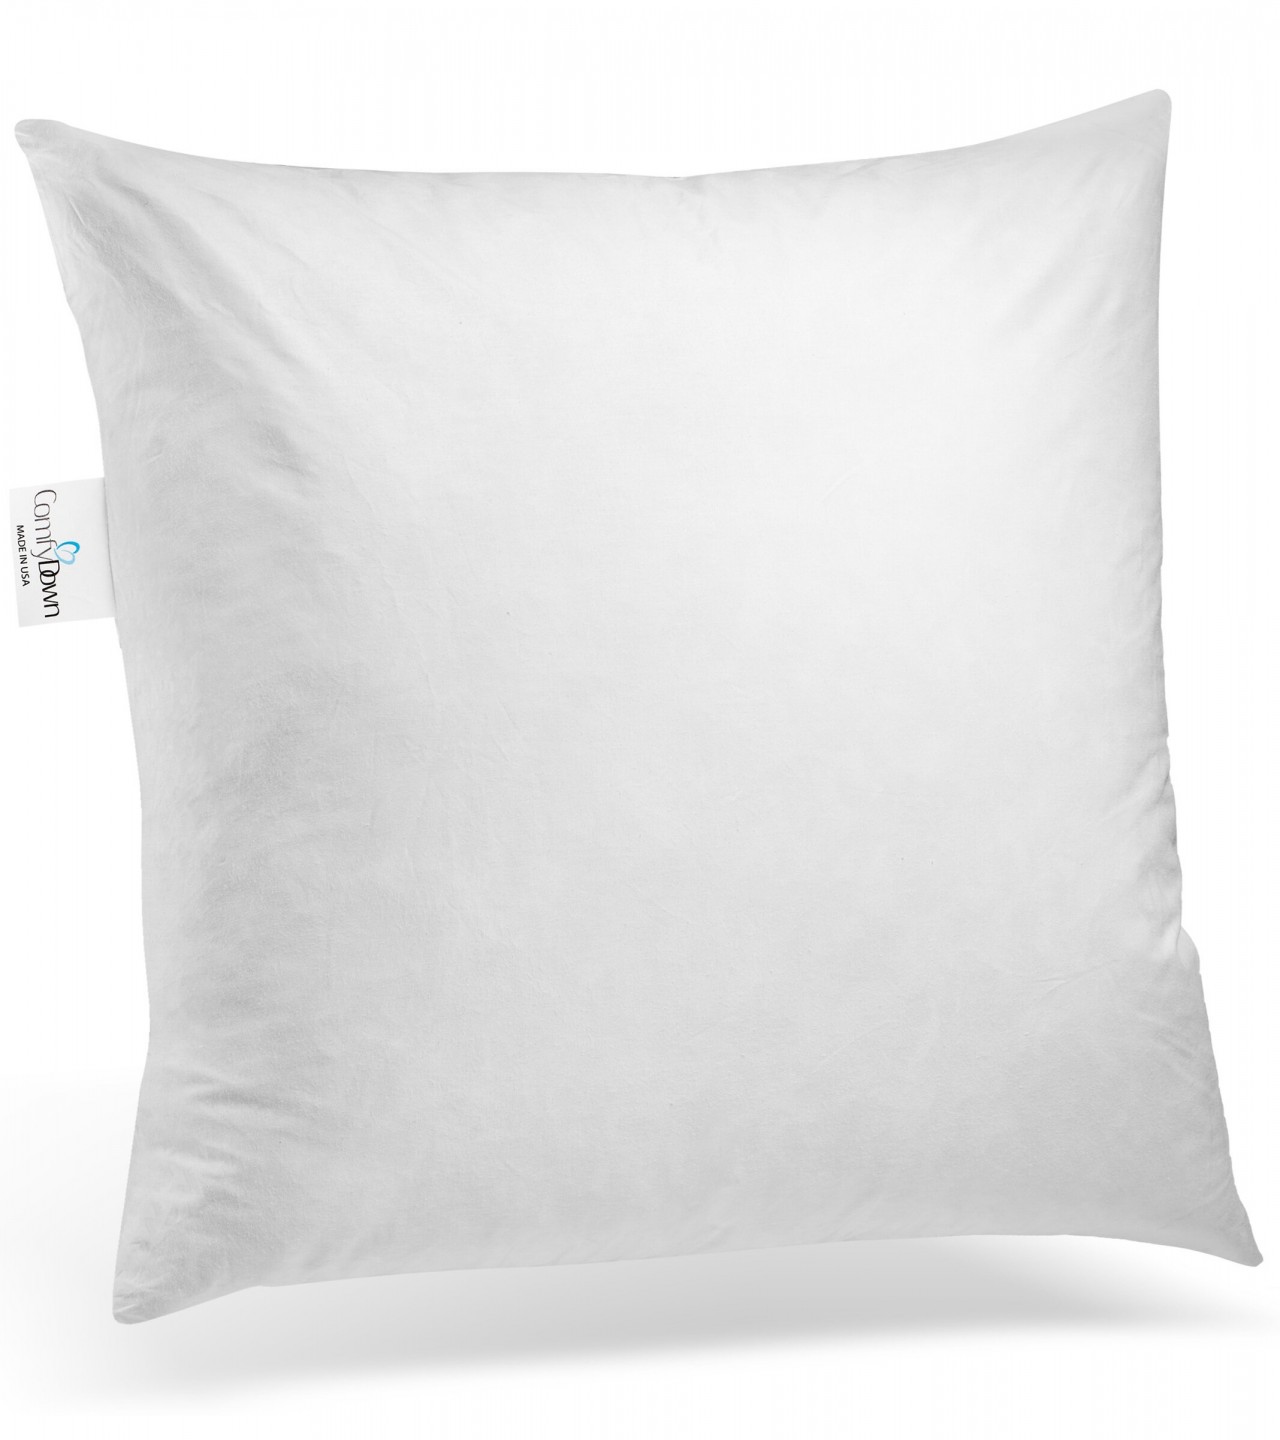 Throw Cushion Pillow With Filling - (White 16*16)